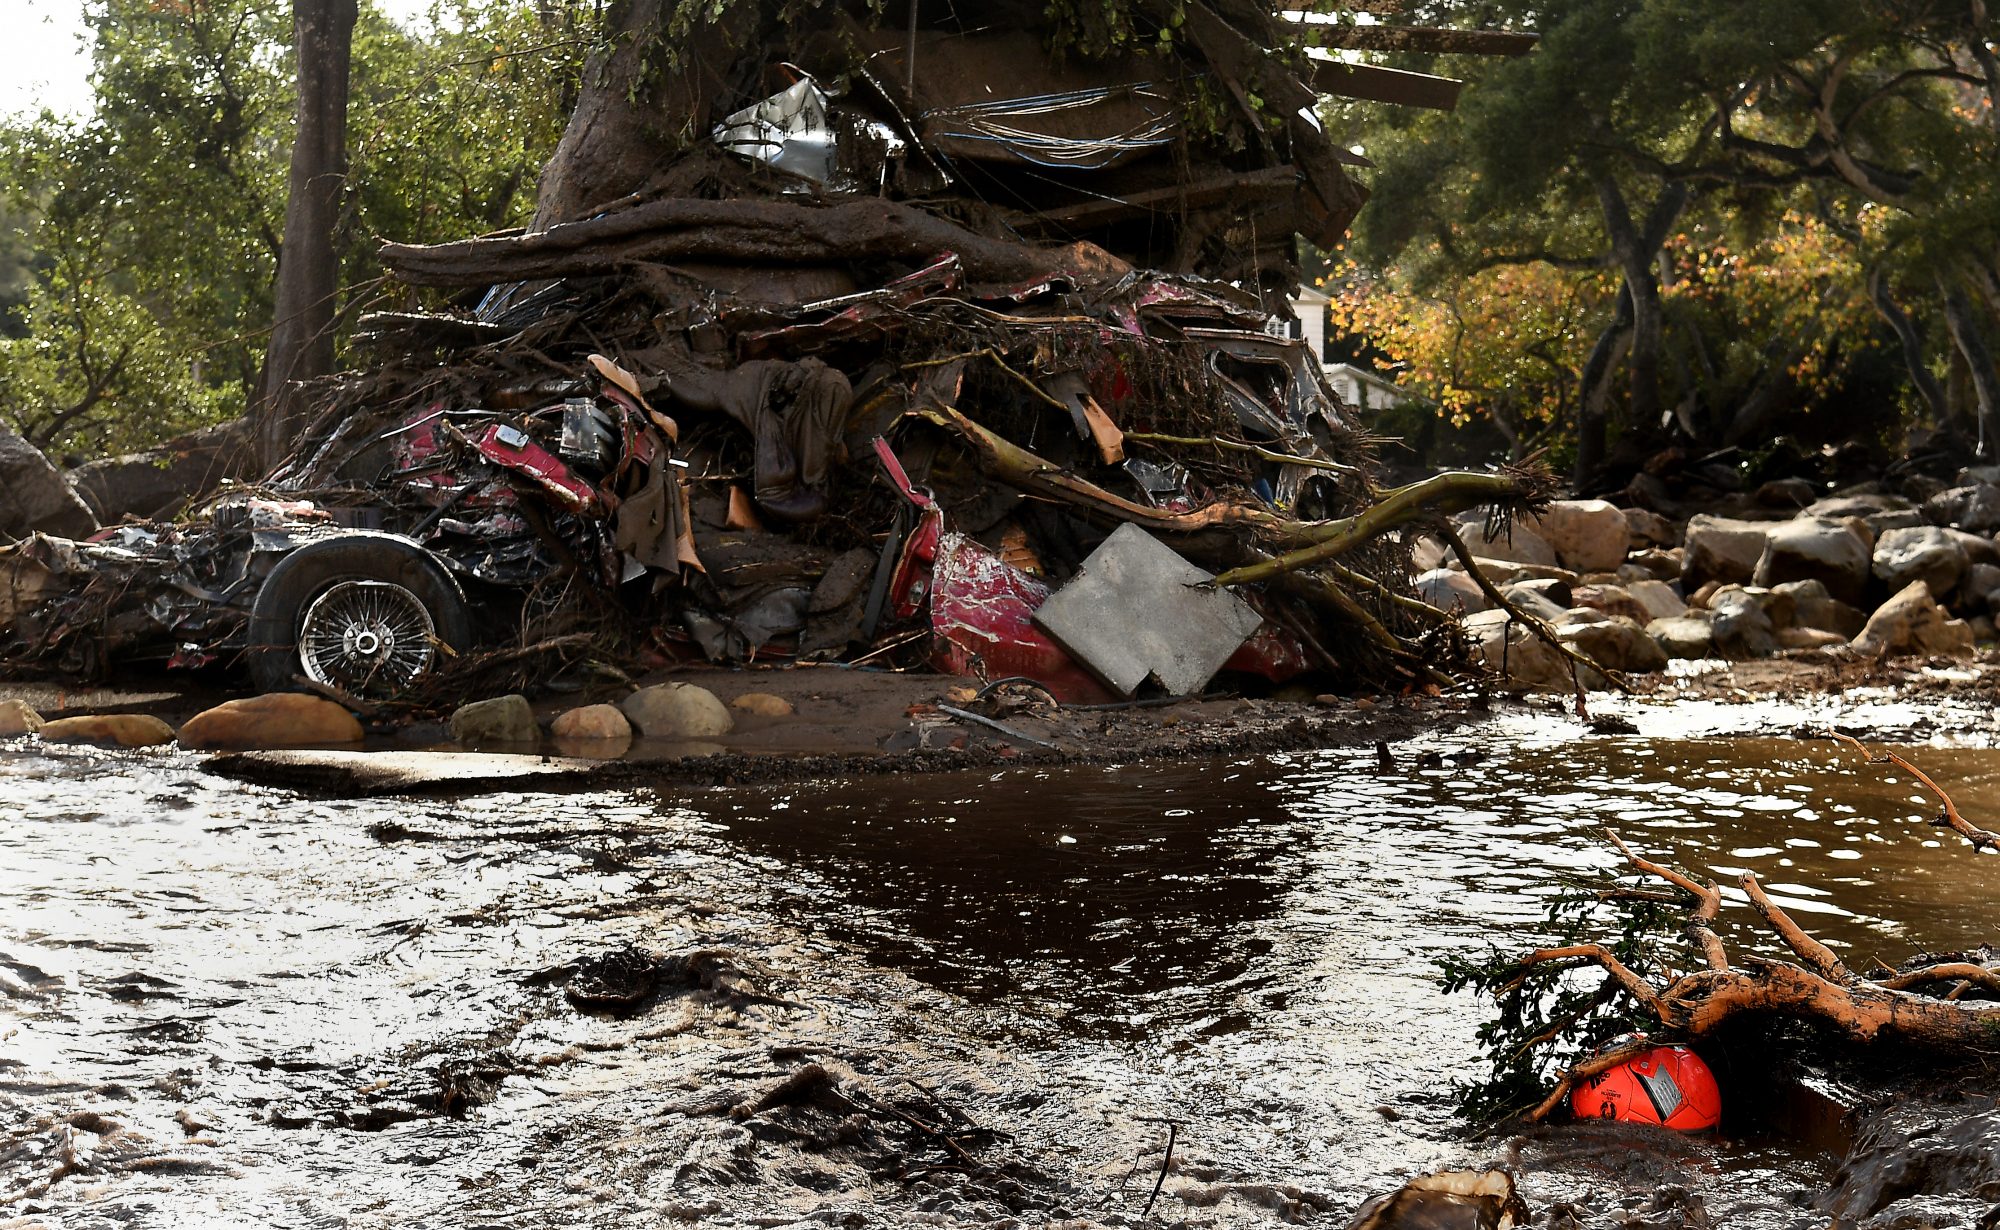 MONTECITO, CA - JANUARY 9: A mangled car along with other debris stack up aguainst a tree along Hot Springs Road in Montecito after a major storm hit the burn area Tuesday January 9, 2018 in Montecito, California.